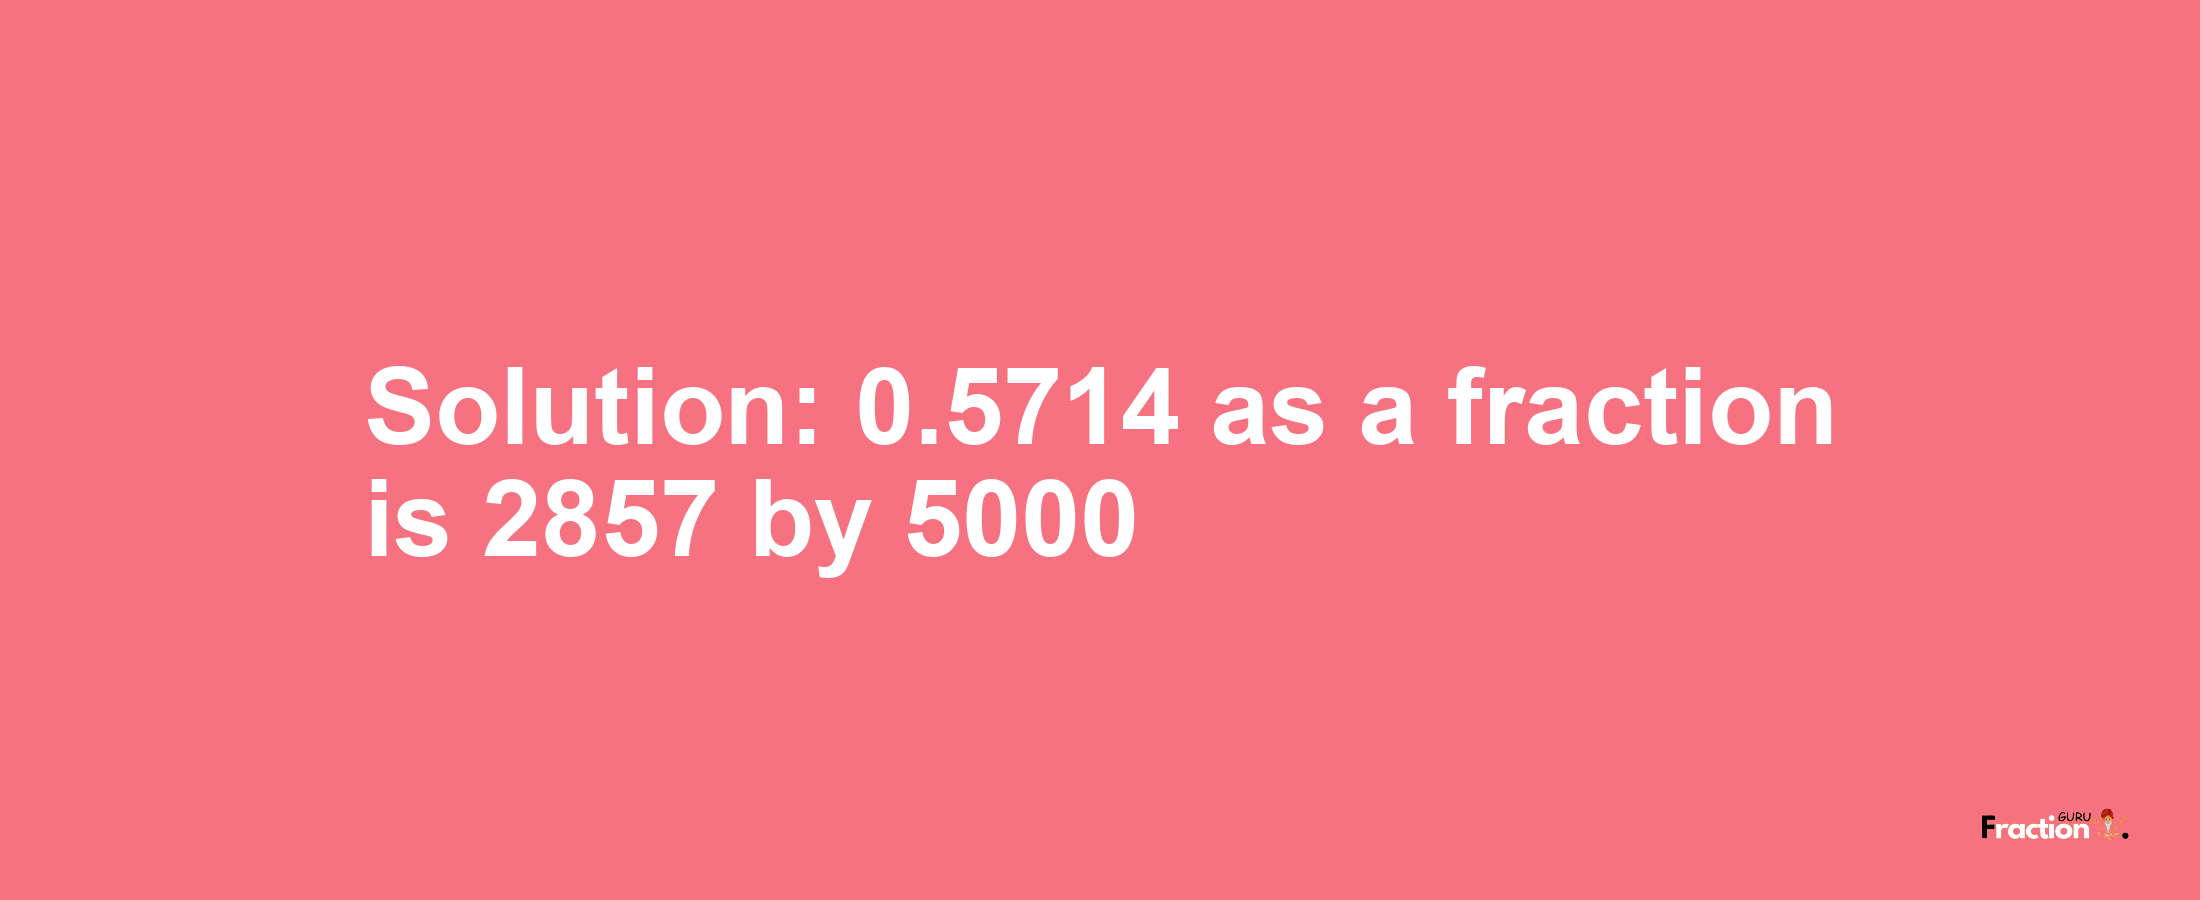 Solution:0.5714 as a fraction is 2857/5000